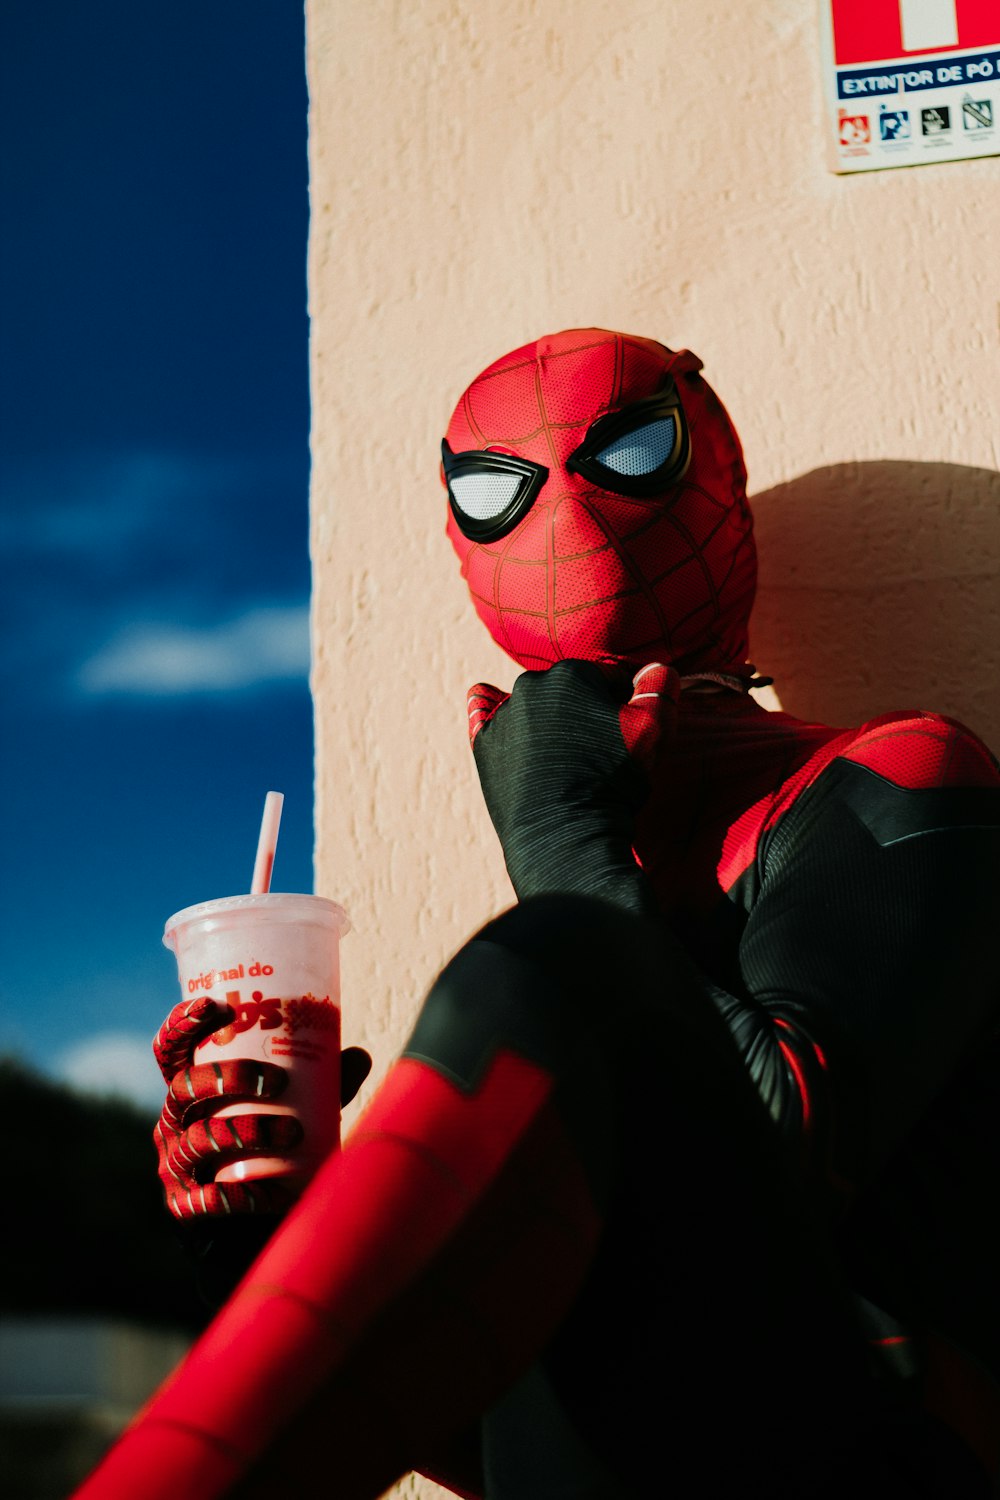 a person in a spiderman costume holding a drink